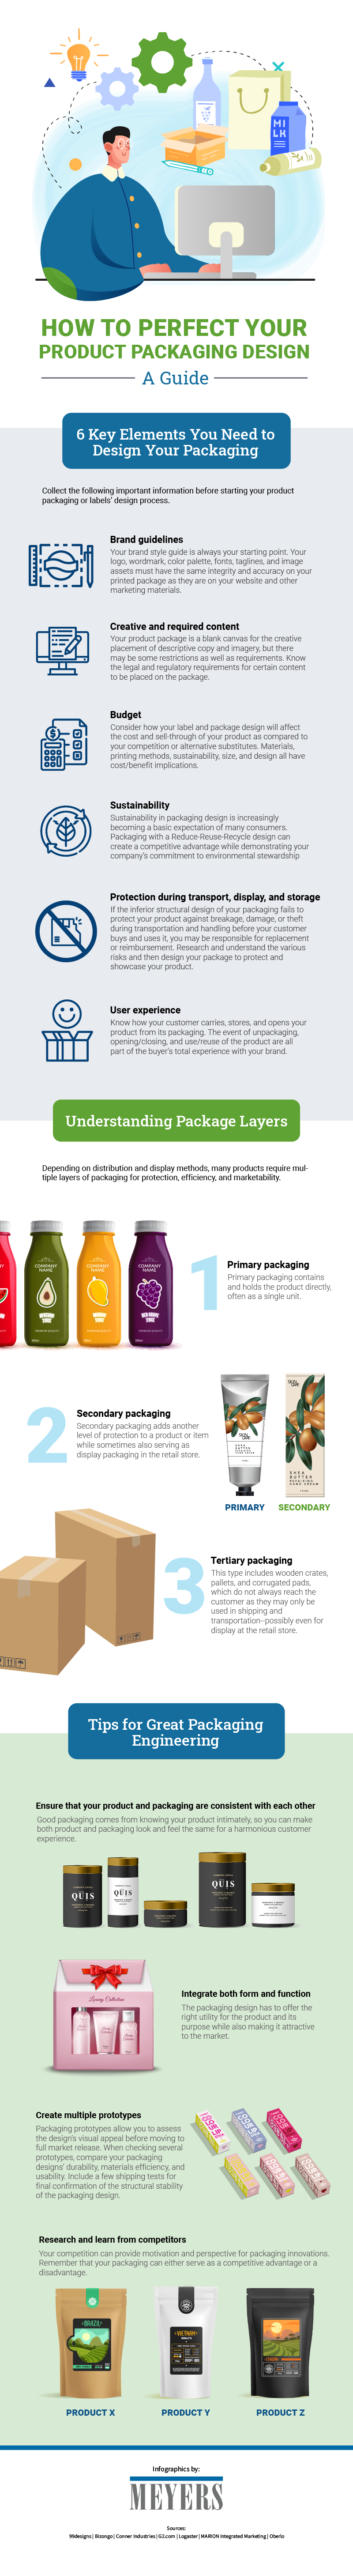 How to Perfect Your Product Packaging Design